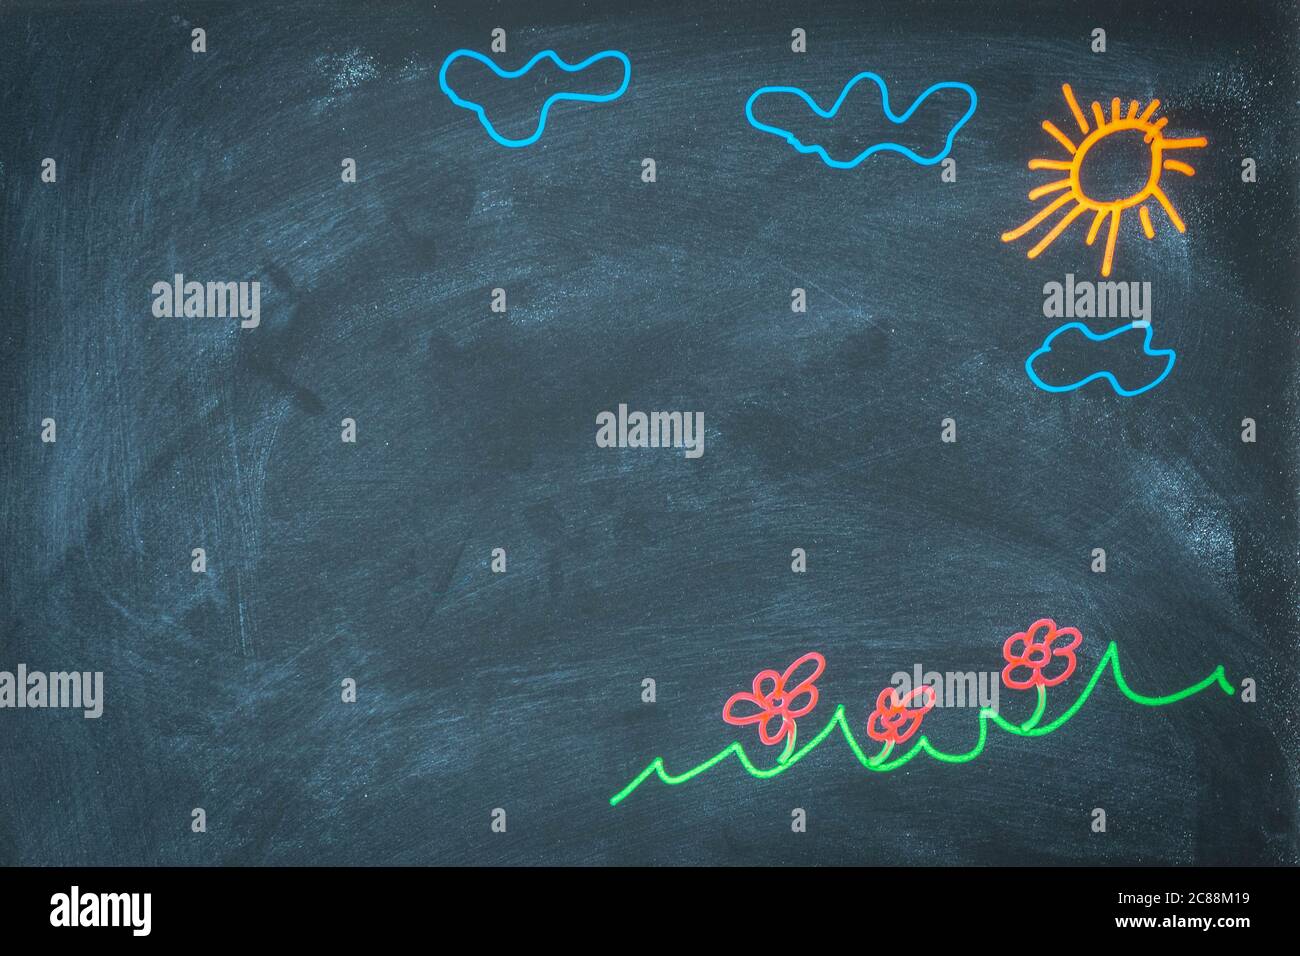 Colored chalk drawing on blackboard for back to school concept. Top view of chalkboard with sun, clouds, flowers, ar grass drawing. Hand drawn picture Stock Photo